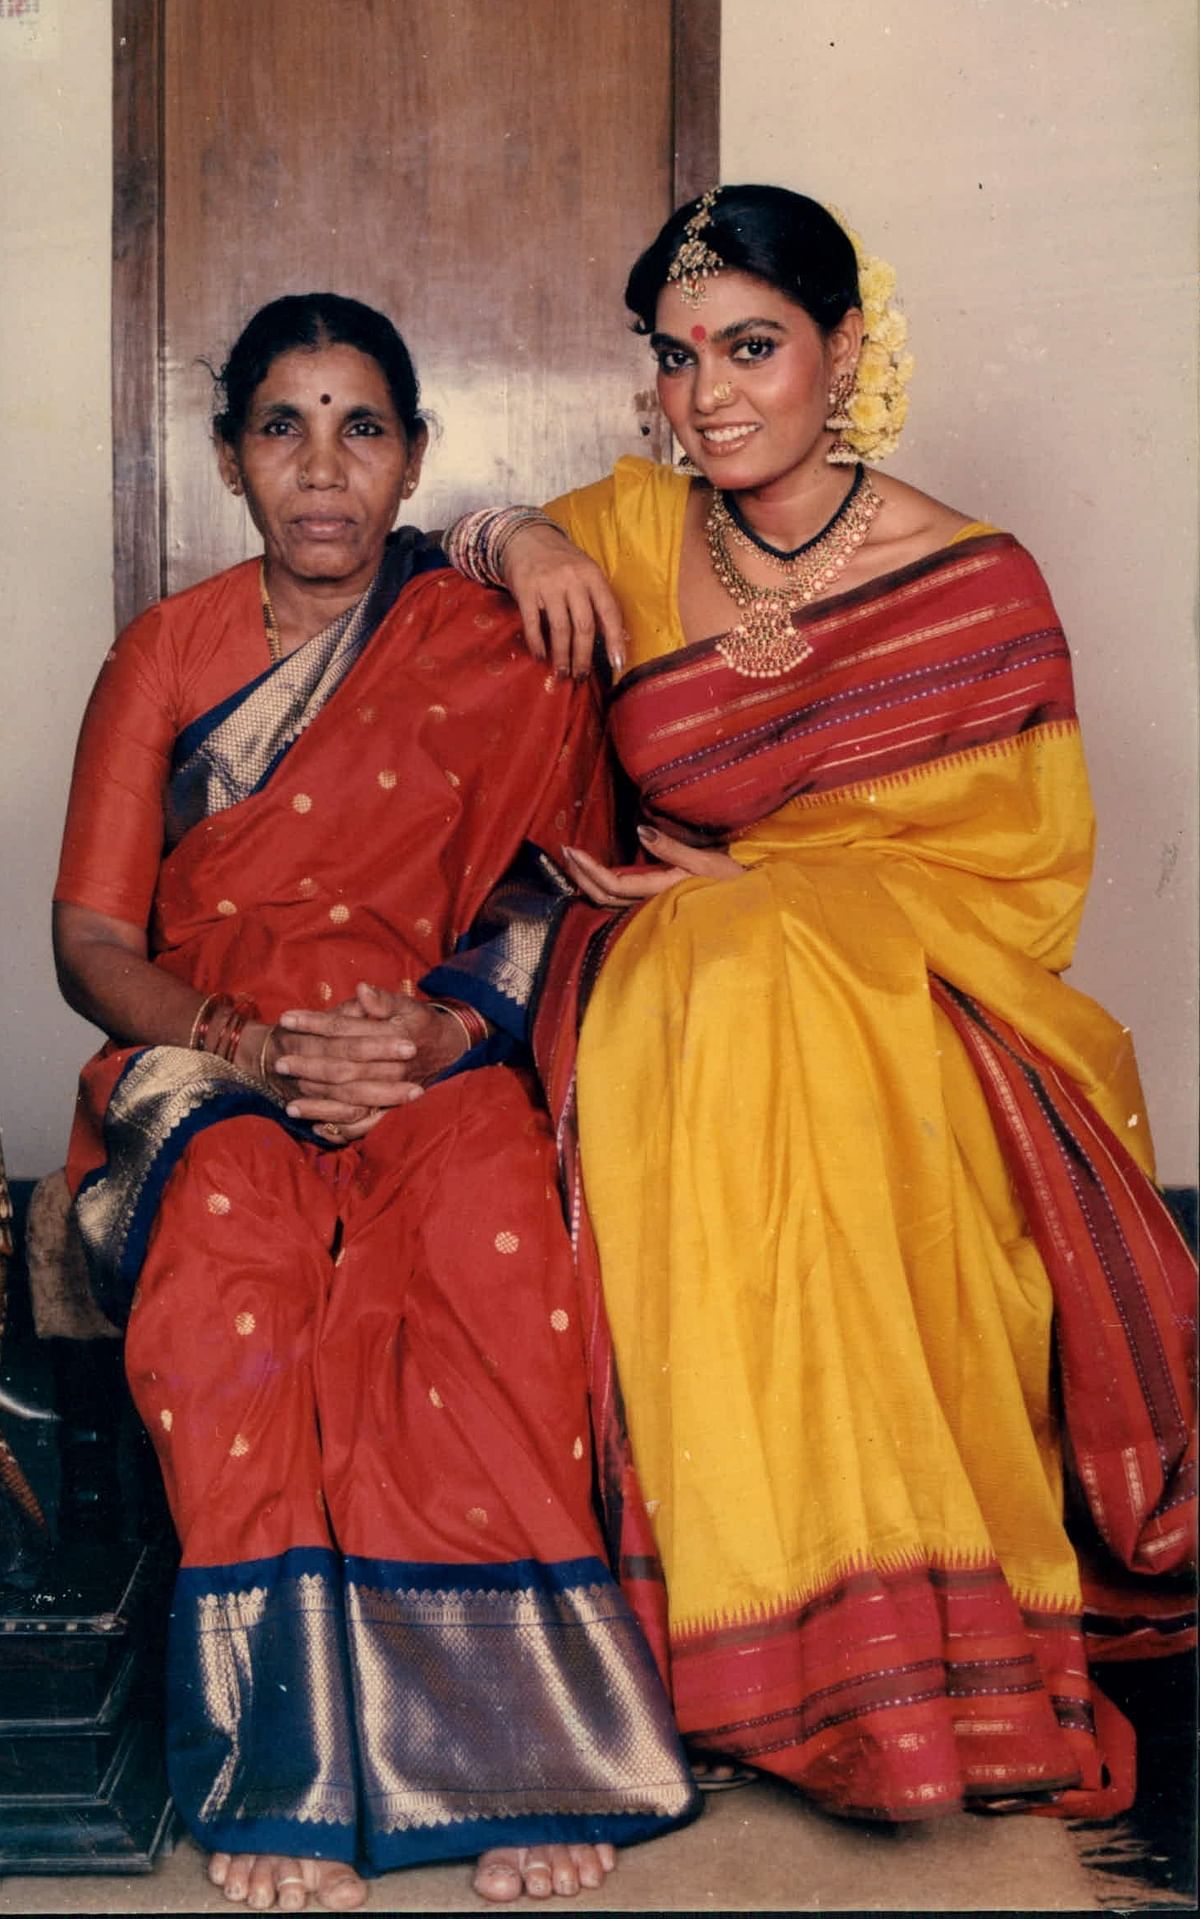 Silk Smitha with her mother